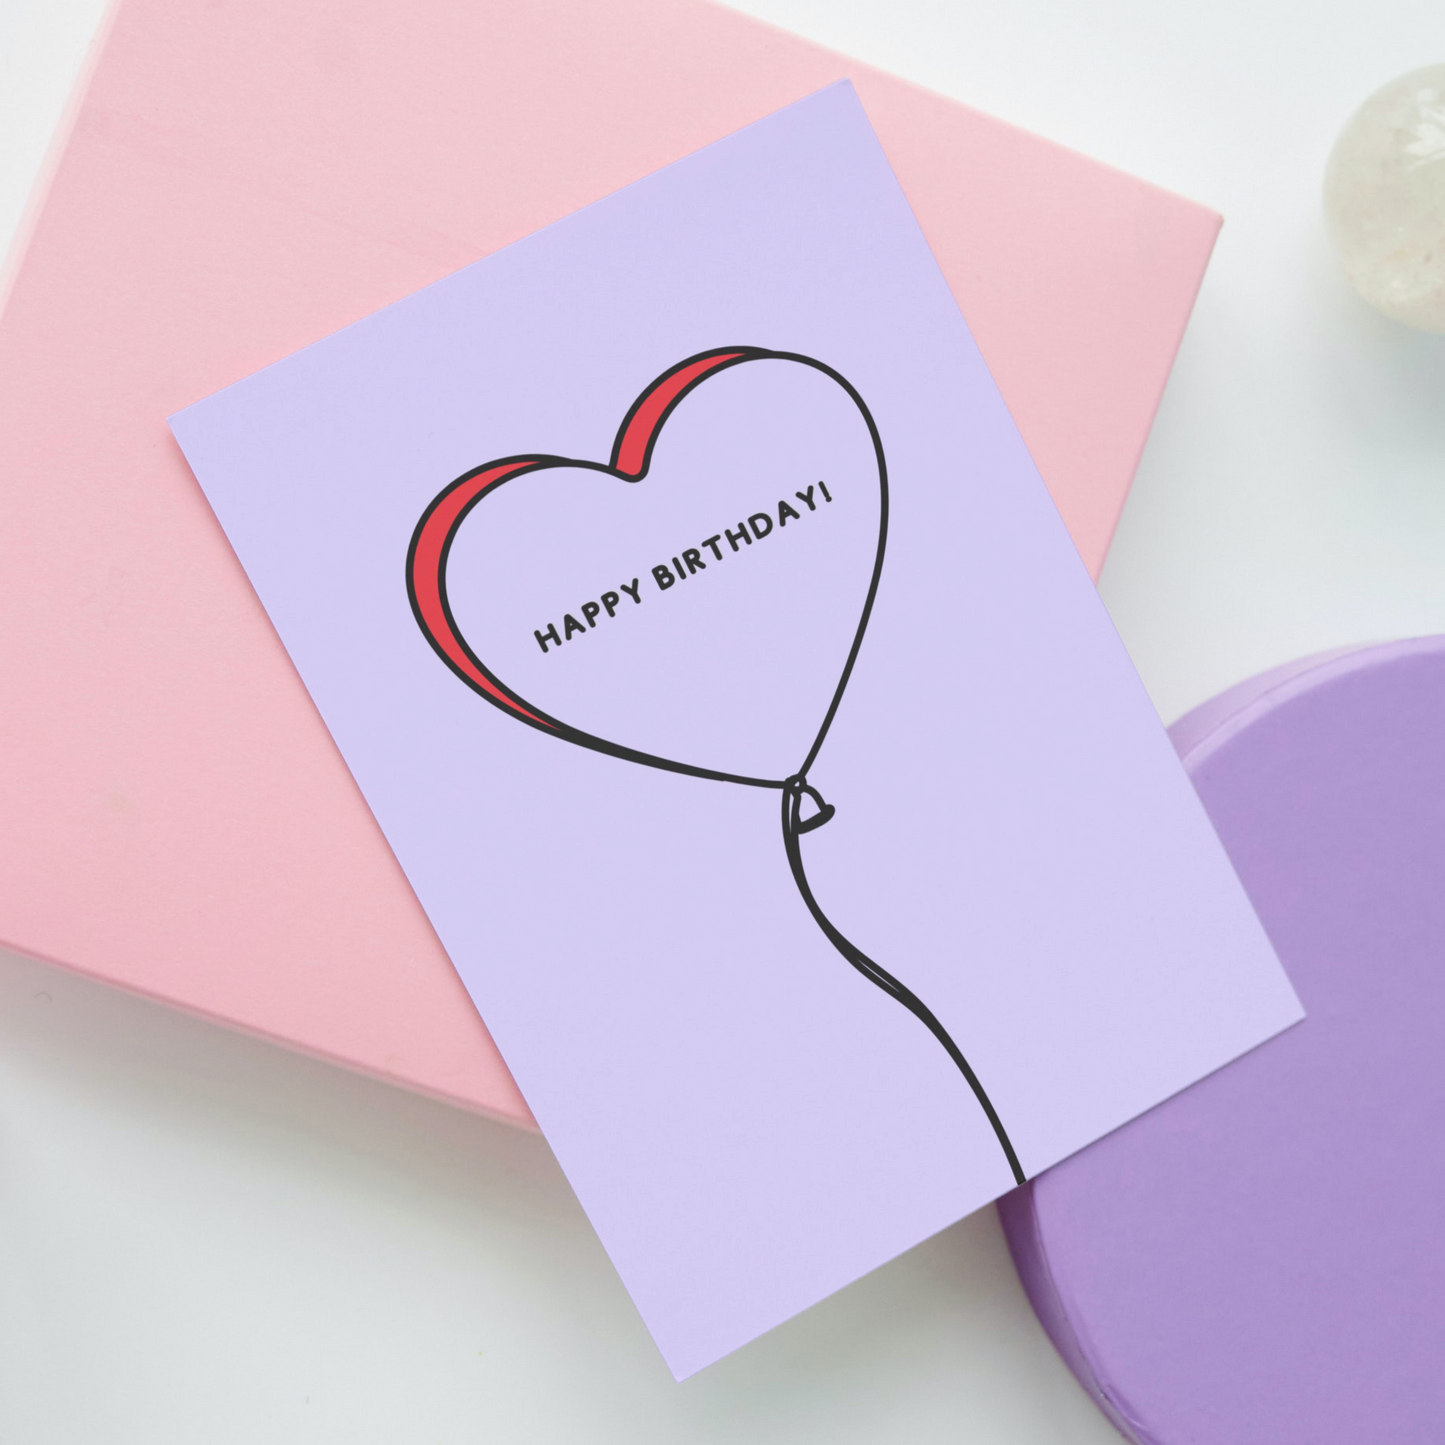 "Happy Birthday!" Heart Ballon - Personalised Gift Note Card